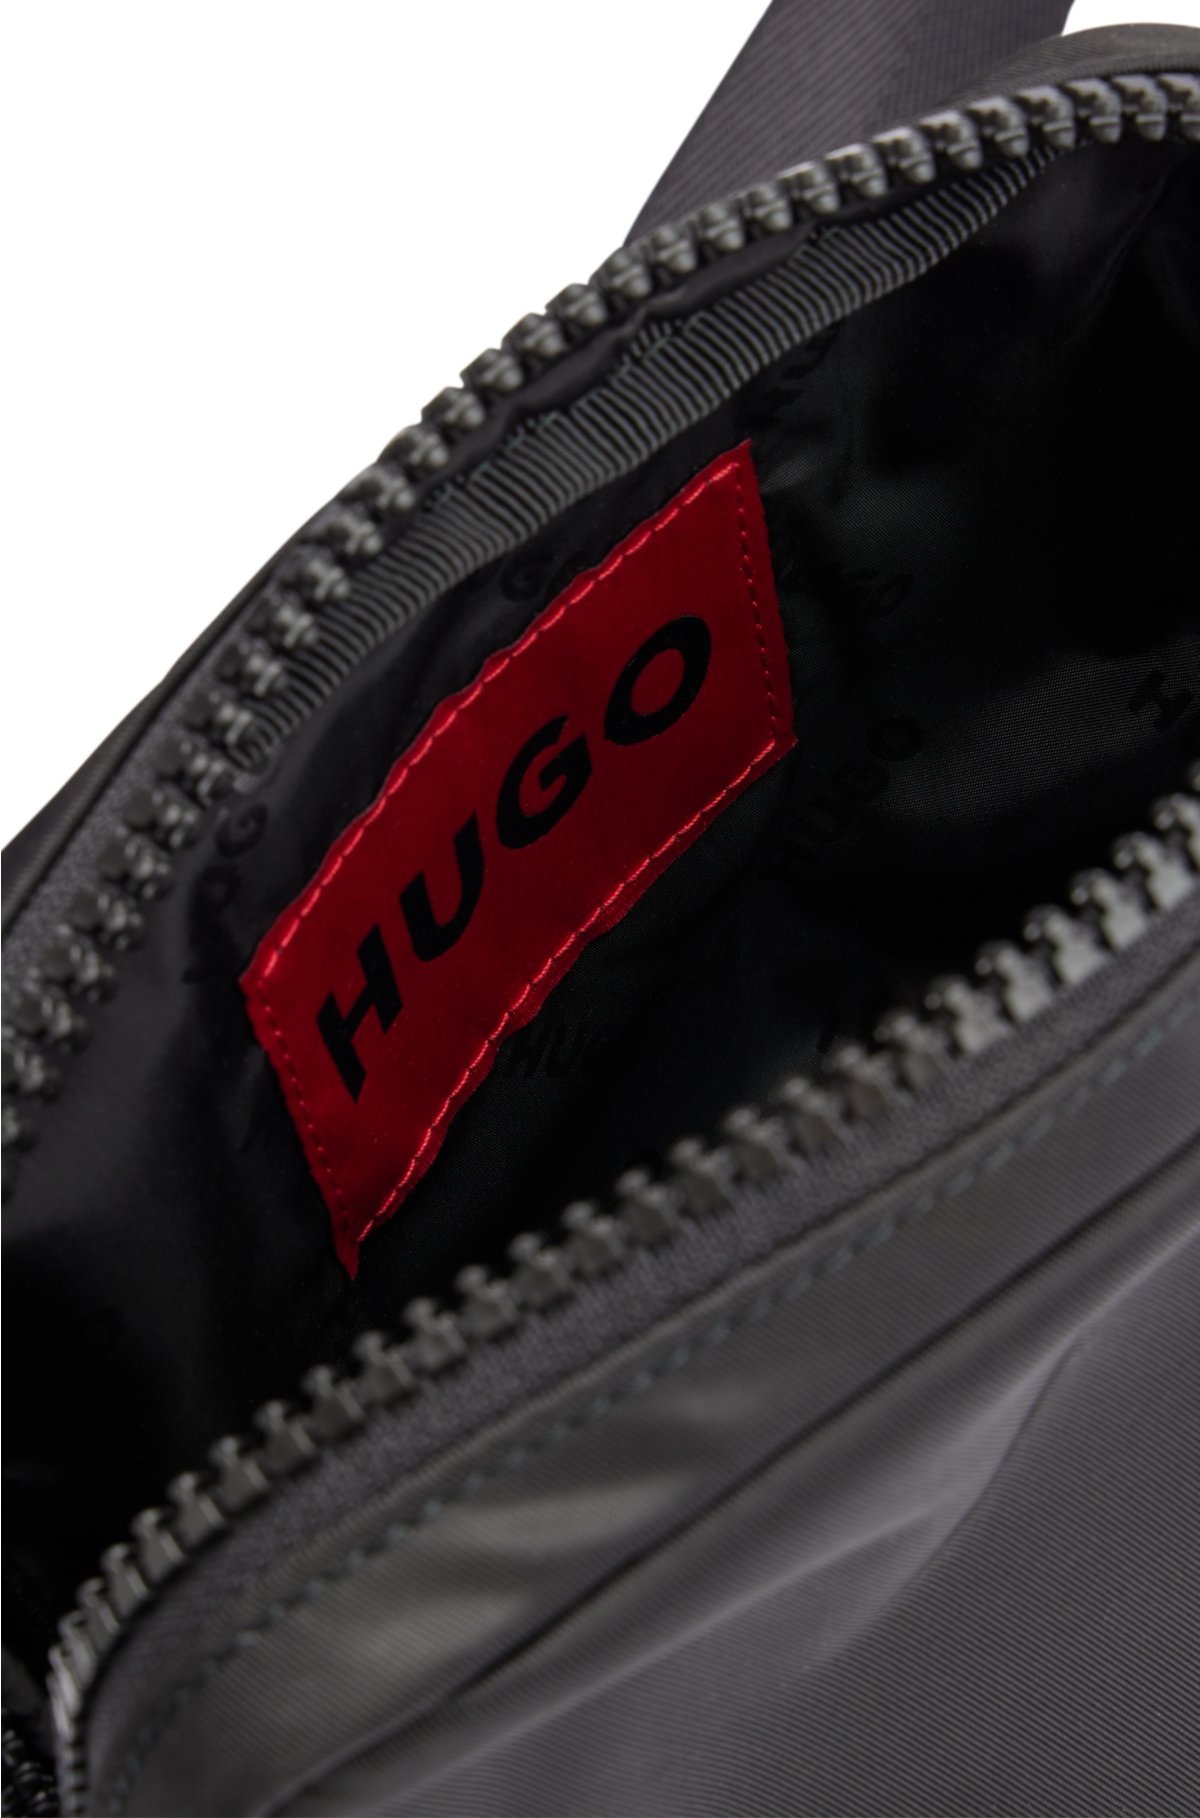 HUGO - Reporter bag with red rubber logo label